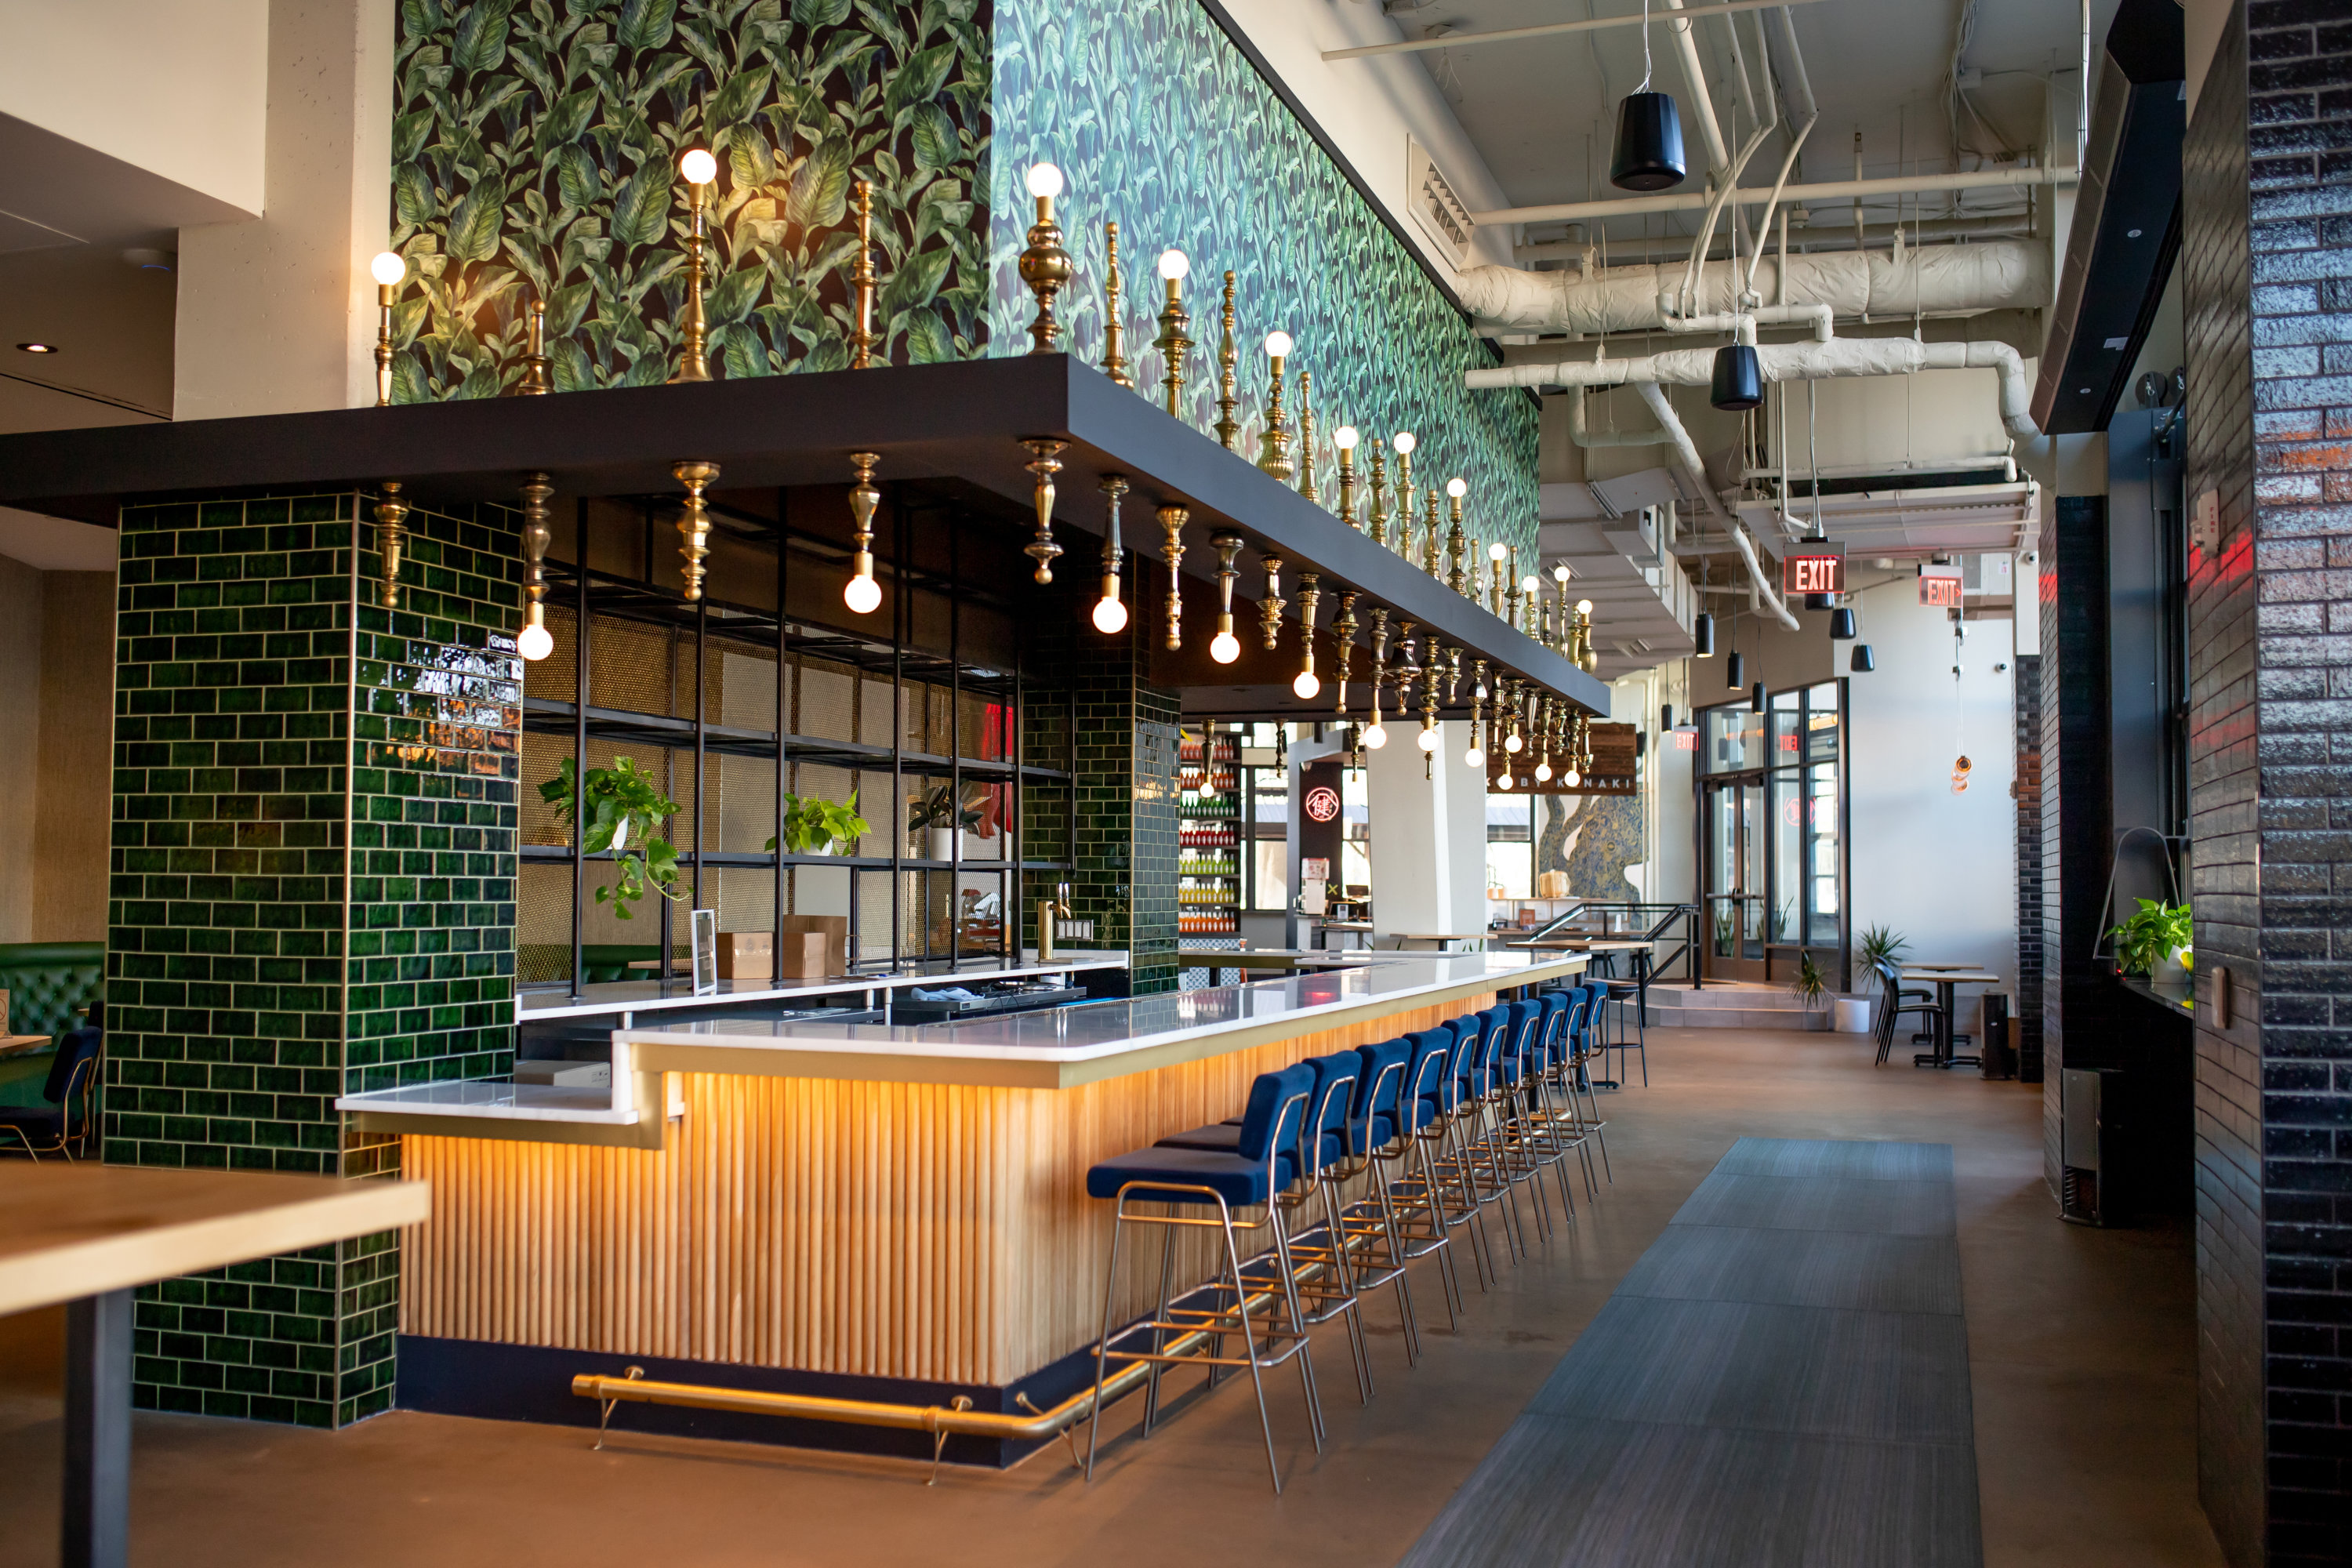 The Best Dishes, Drinks, and Snacks at 3 New-Wave Food Halls Around DC